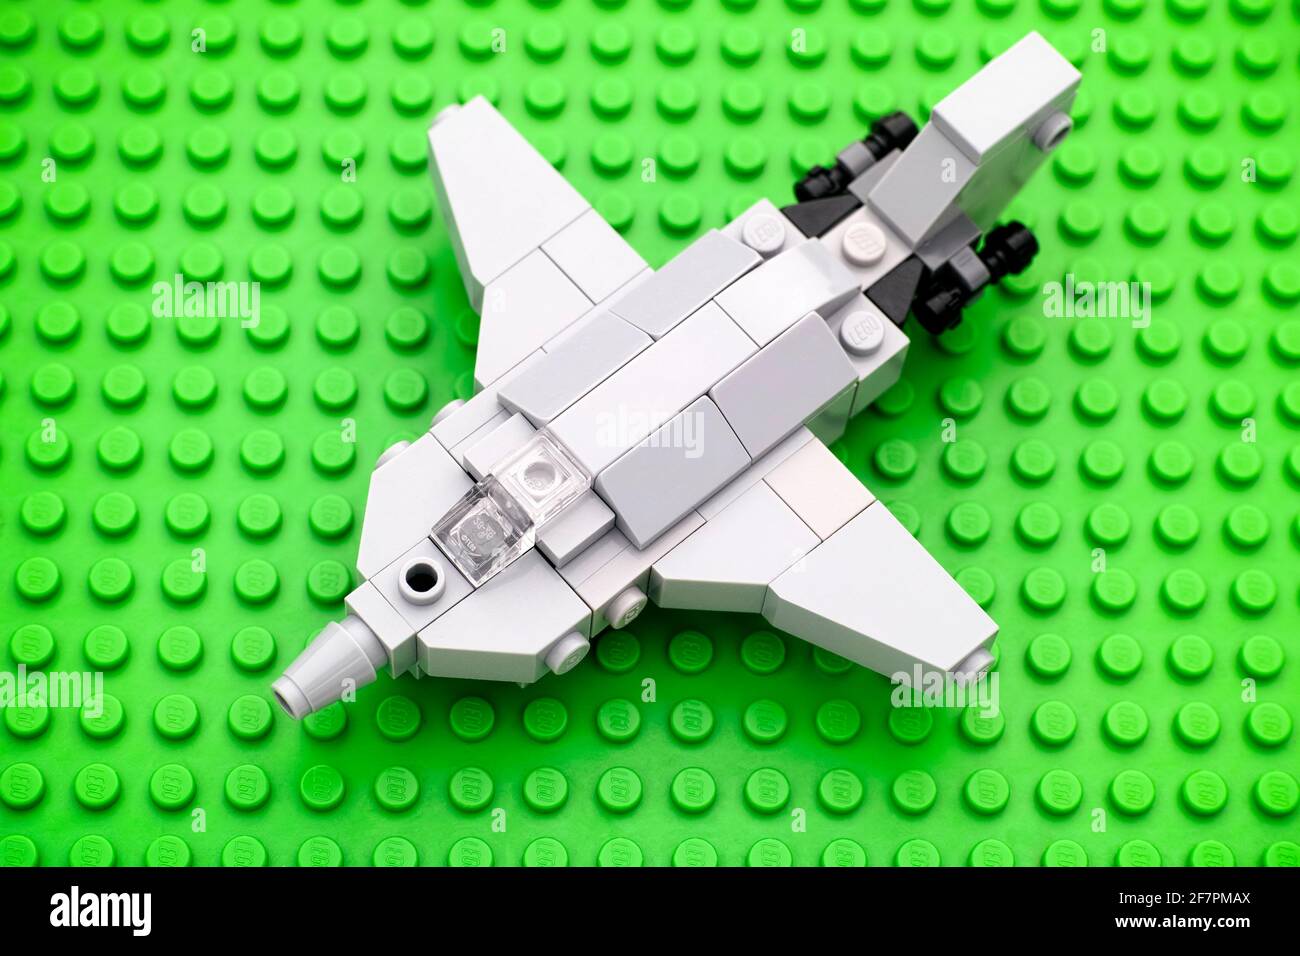 Lego Brick Plane High Resolution Stock Photography and Images - Alamy